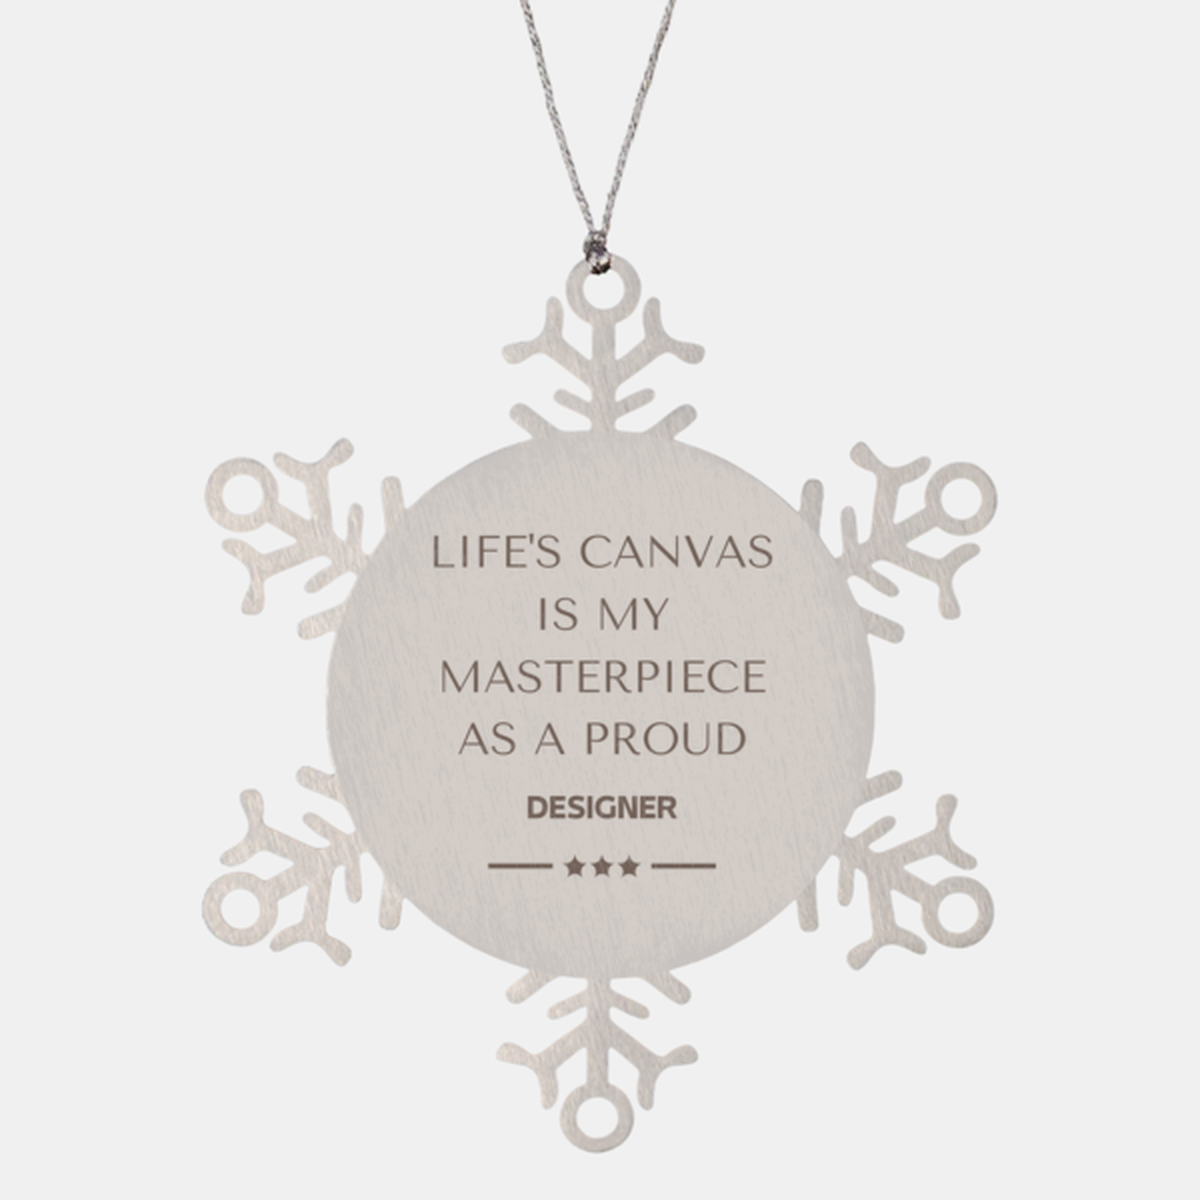 Proud Designer Gifts, Life's canvas is my masterpiece, Epic Birthday Christmas Unique Snowflake Ornament For Designer, Coworkers, Men, Women, Friends